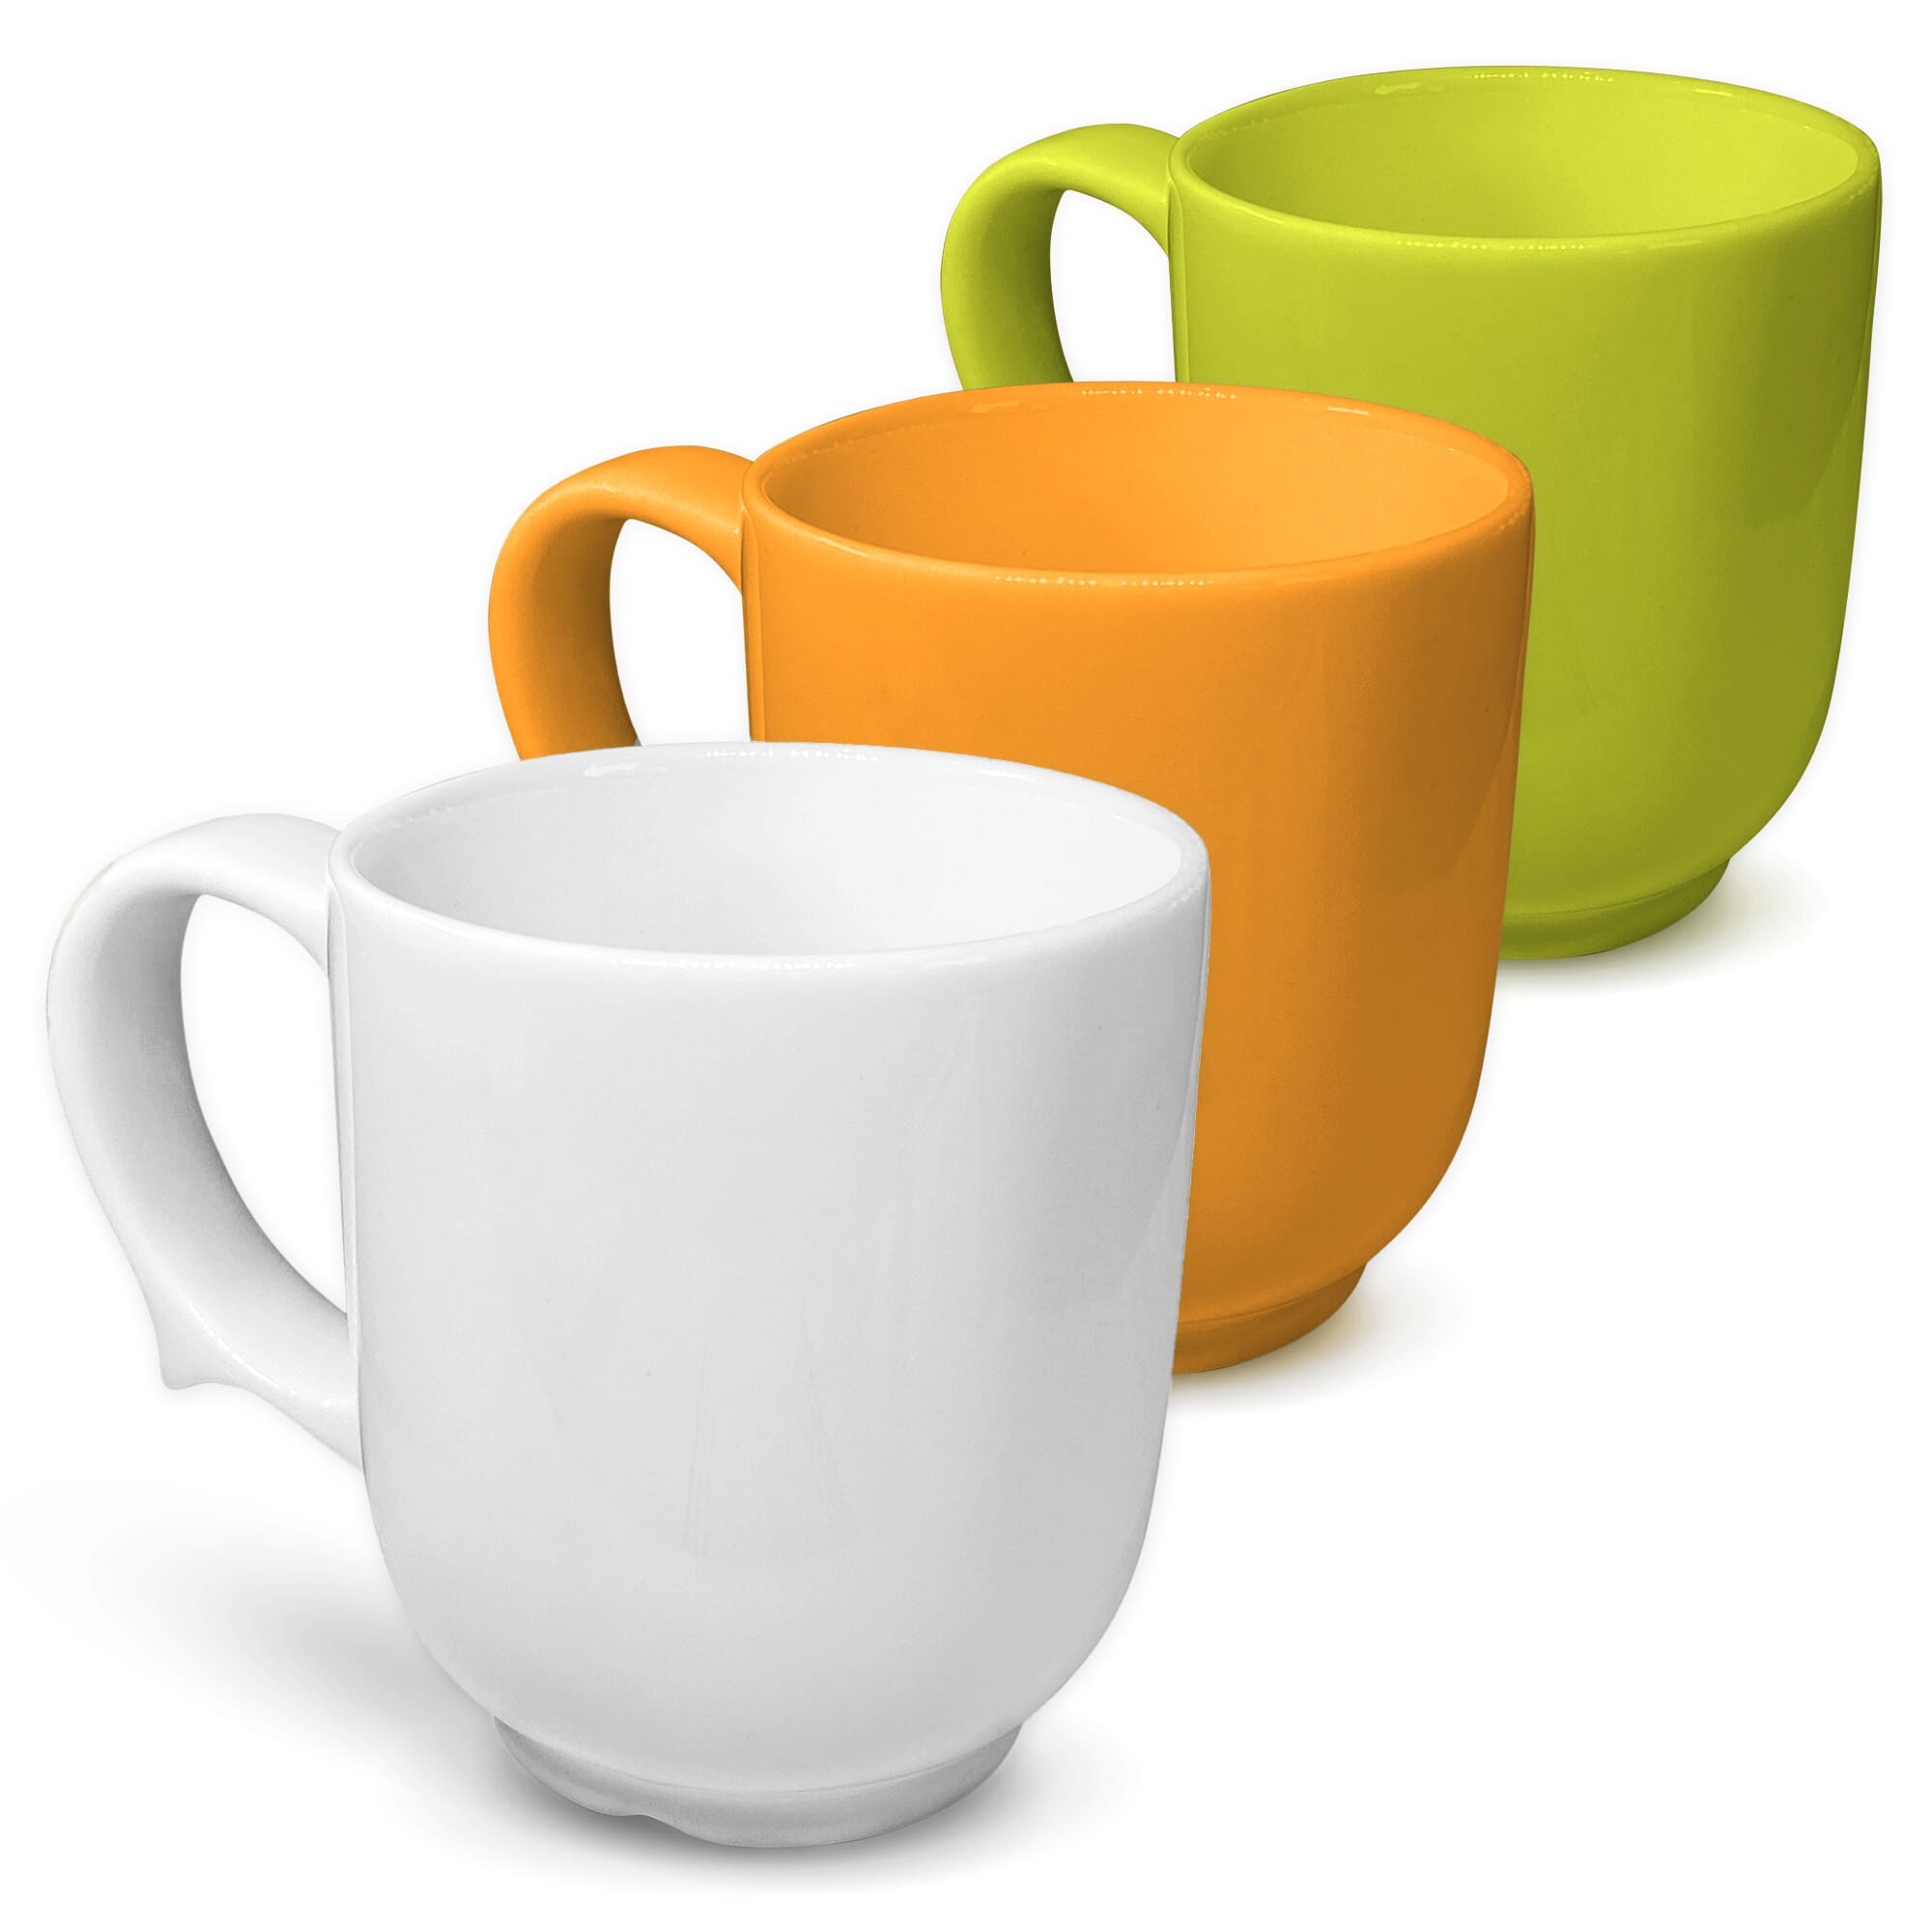 Non Spill Cup, Disabled Drinking Cups, Two Handled Mugs For Elderly